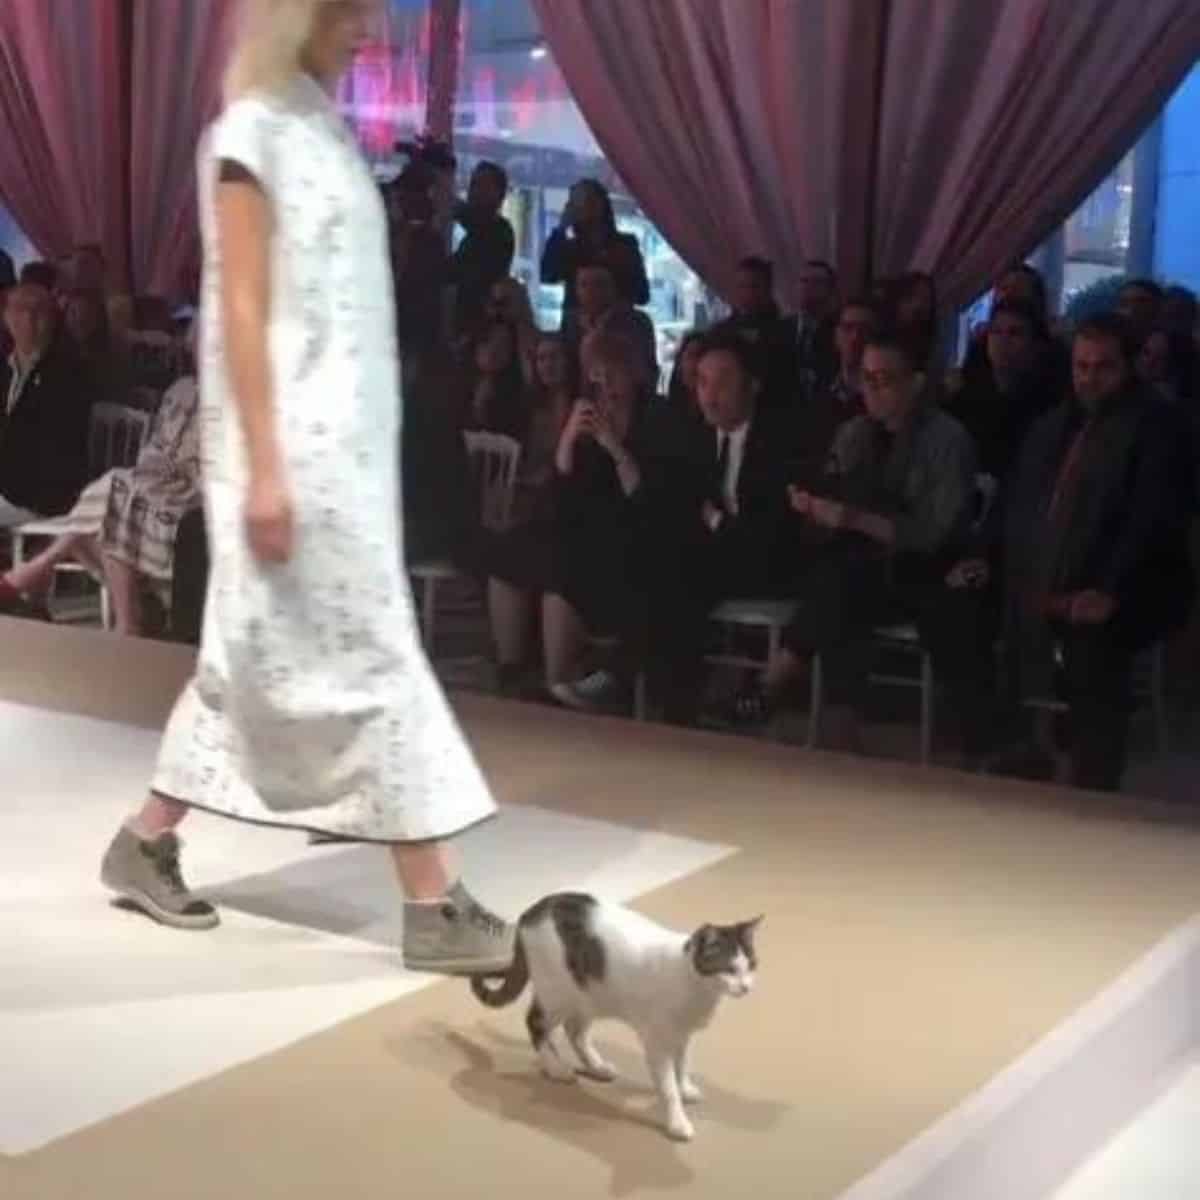 suddenly the cat ran into the fashion show